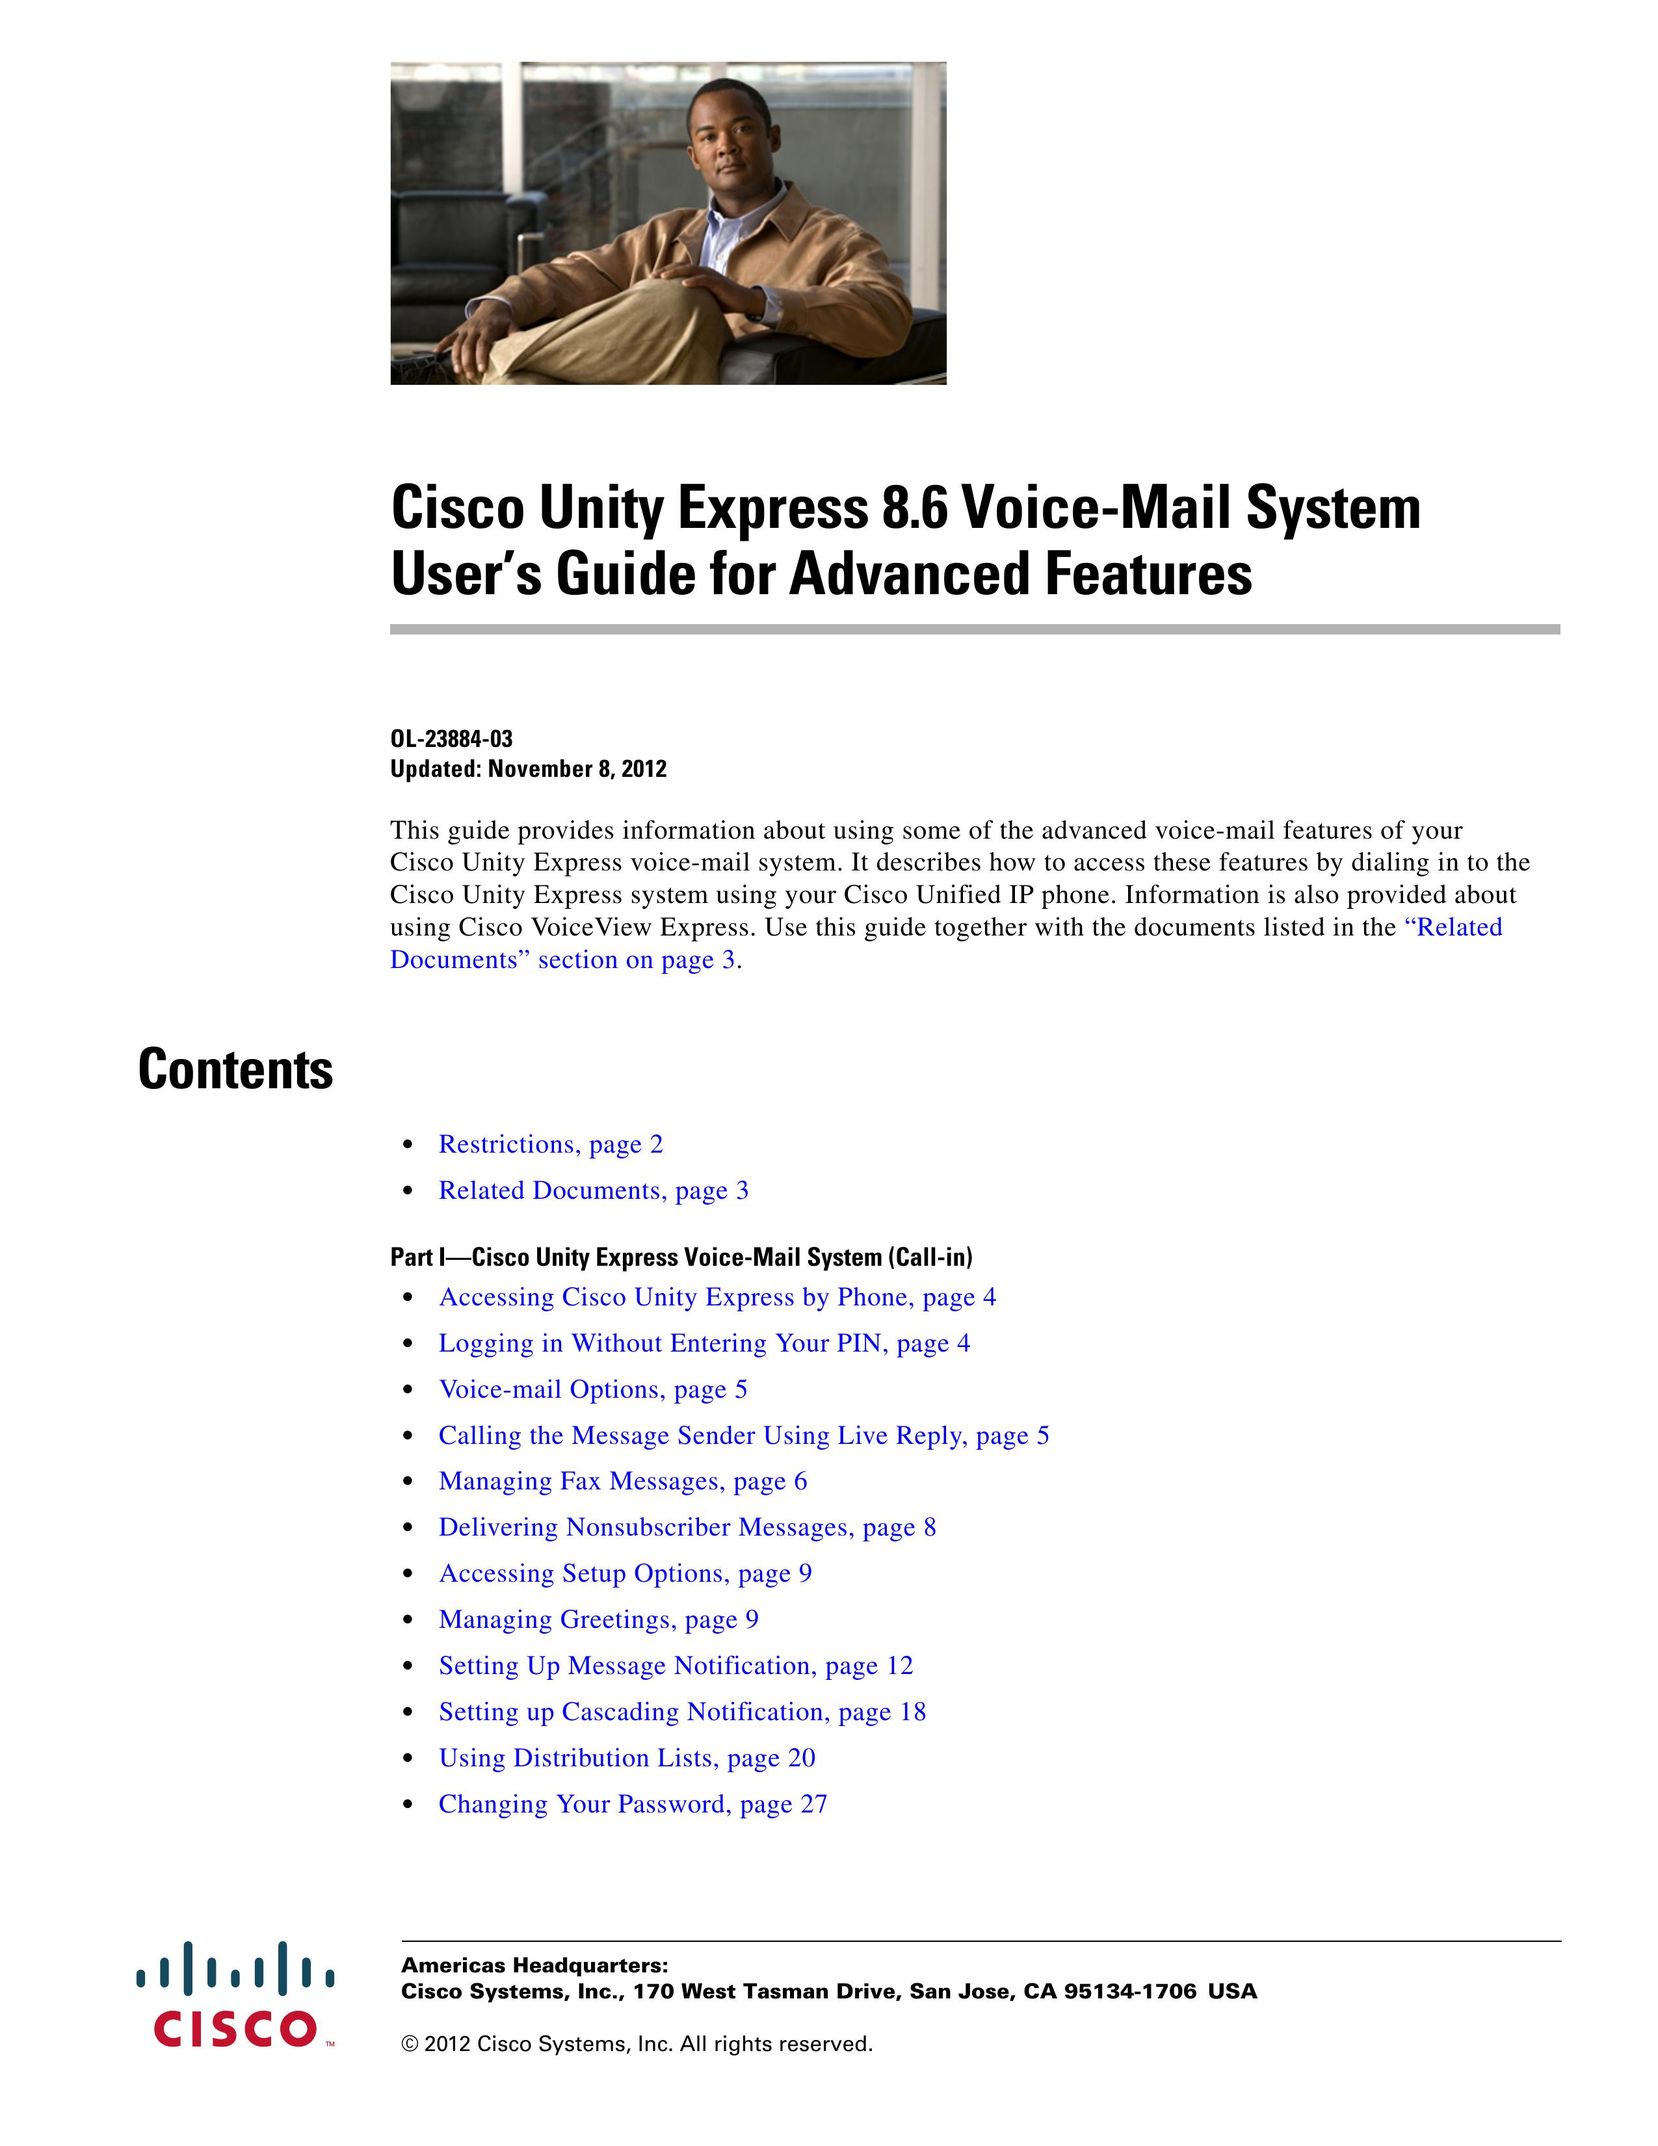 Cisco Systems OL-23884-03 Answering Machine User Manual